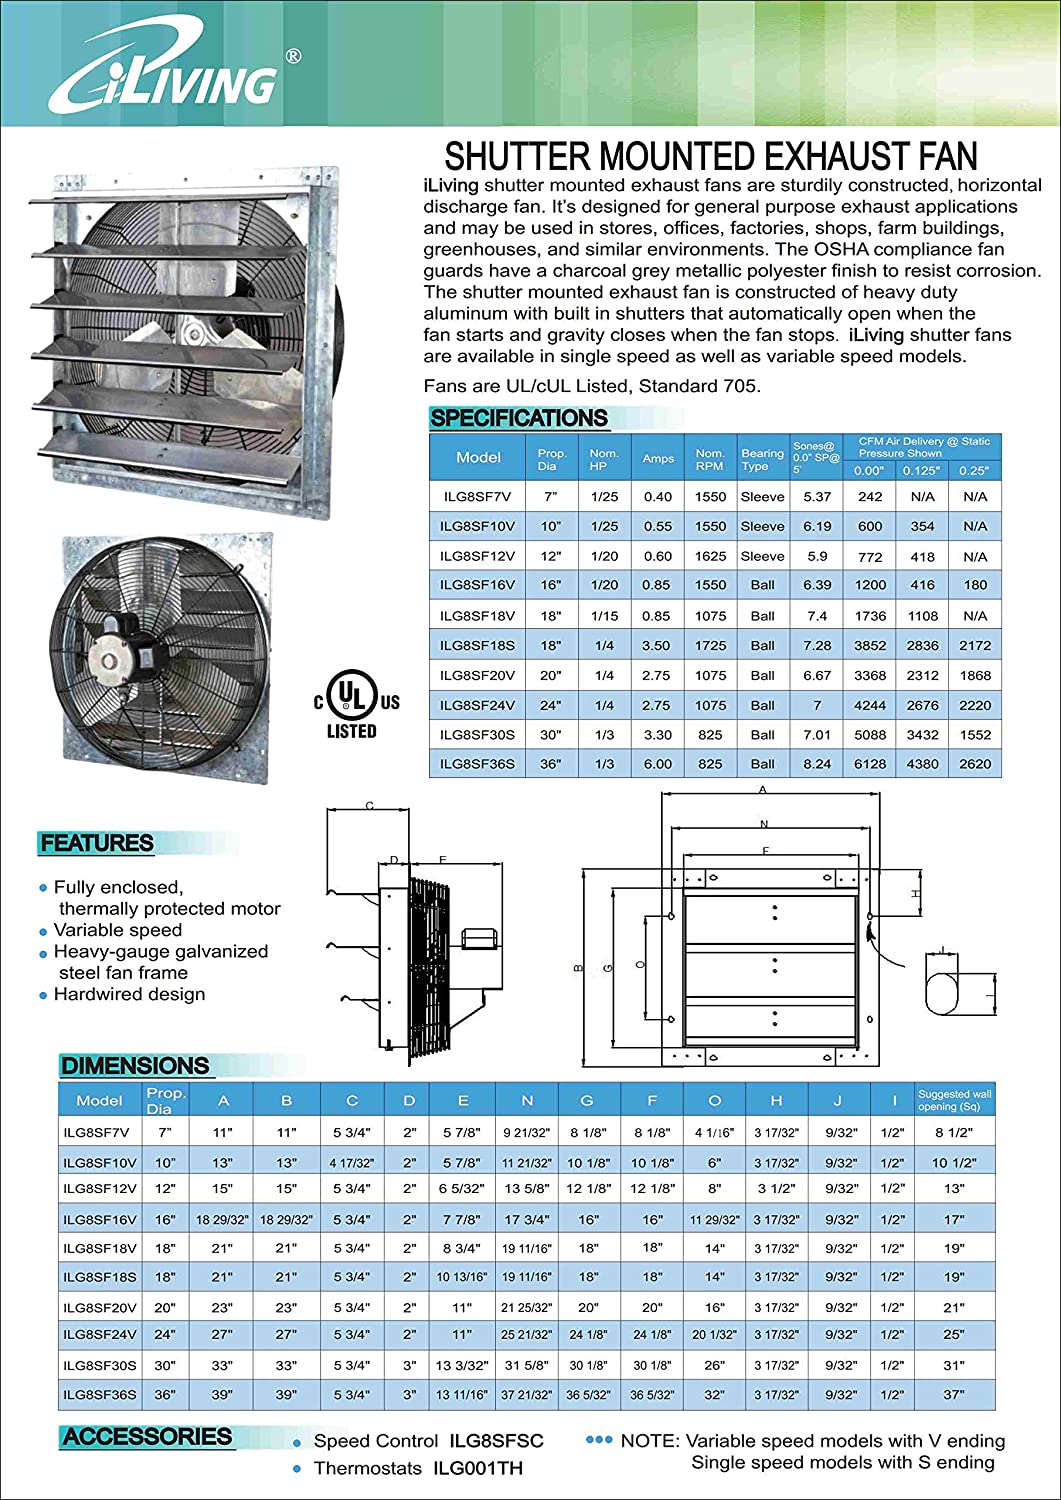 Iliving - 36" Wall Mounted Shutter Exhaust Fan, 6128 CFM, 9000 SQF Coverage Area, Silver (ILG8SF36S) - $247